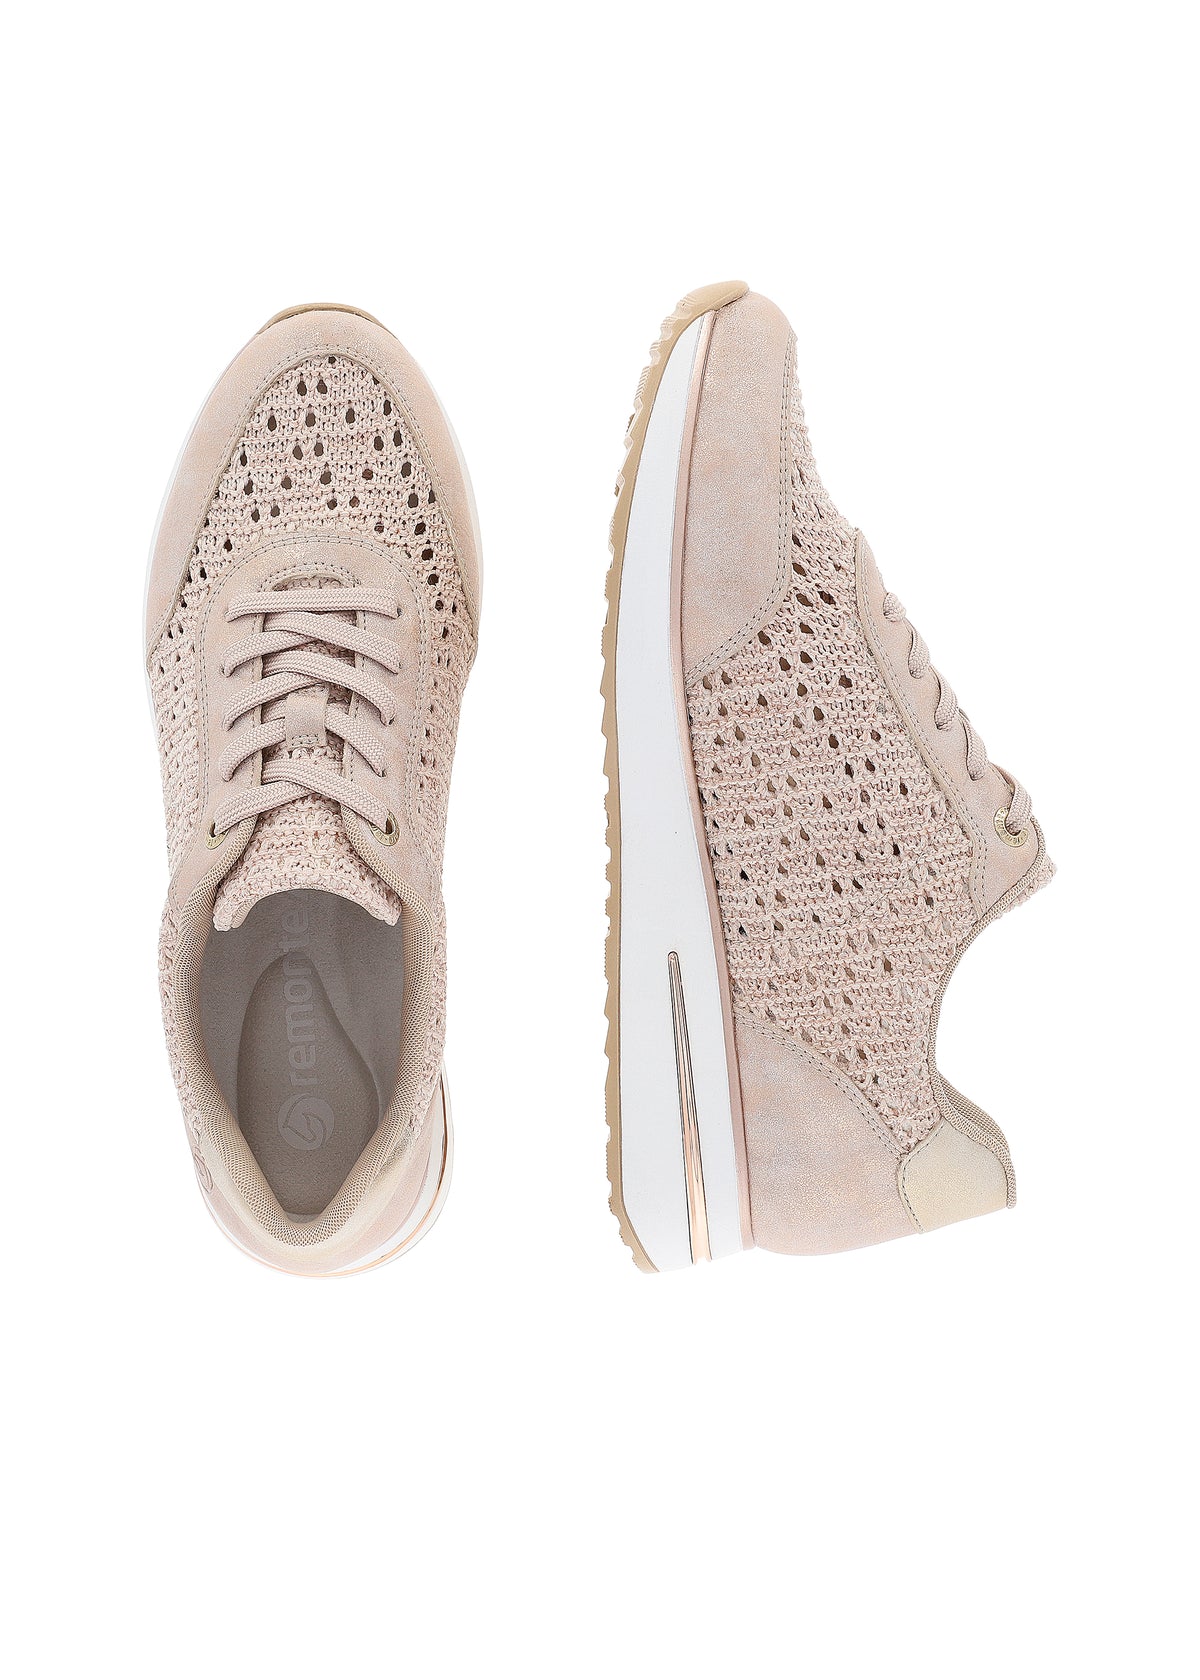 Sneakers with a small wedge sole - pink, knit on the sides